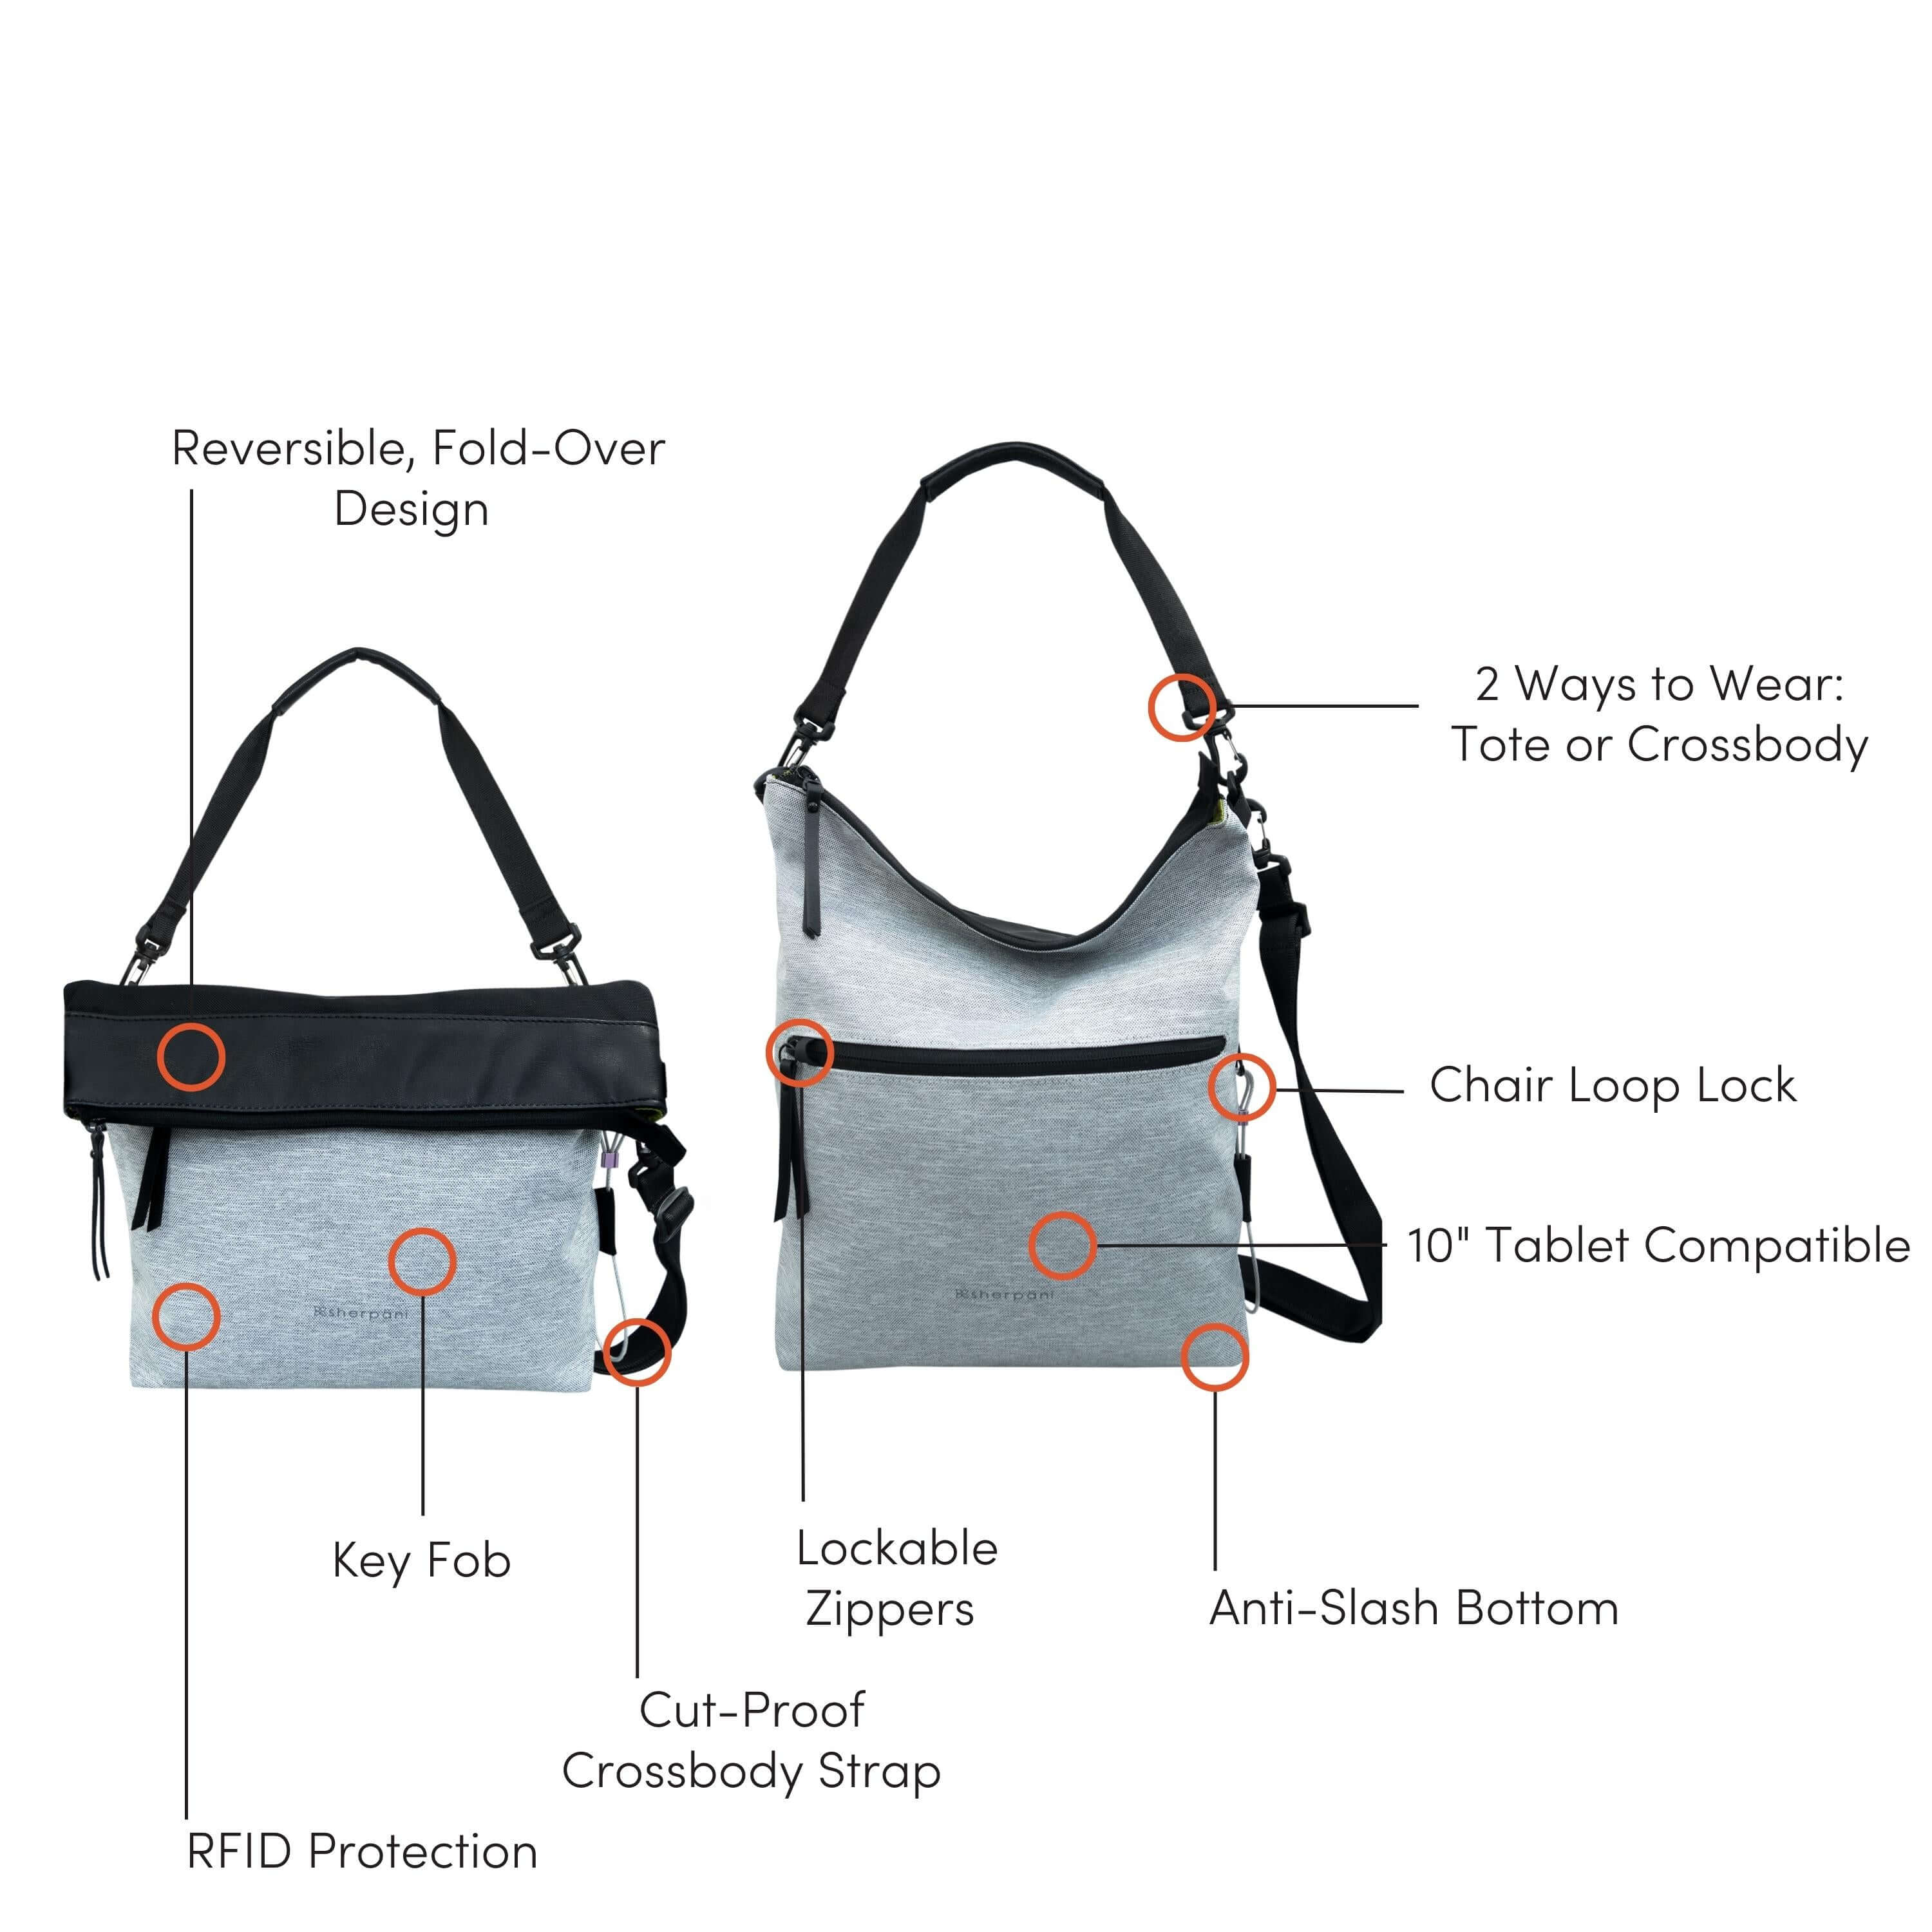 Graphic showcasing the features of Sherpani’s Anti Theft bag, the Vale AT in Sterling. The bag is shown two ways: closed and folded over, open and standing tall. Red circles highlight the following features: Reversible, Fold-Over Design, 2 Ways to Wear: Tote or Crossbody, Chair Loop Lock, 10” Tablet Compatible, Anti-Slash Bottom, Lockable Zippers, RFID Protection, Key Fob, Cut-Proof Crossbody Strap.